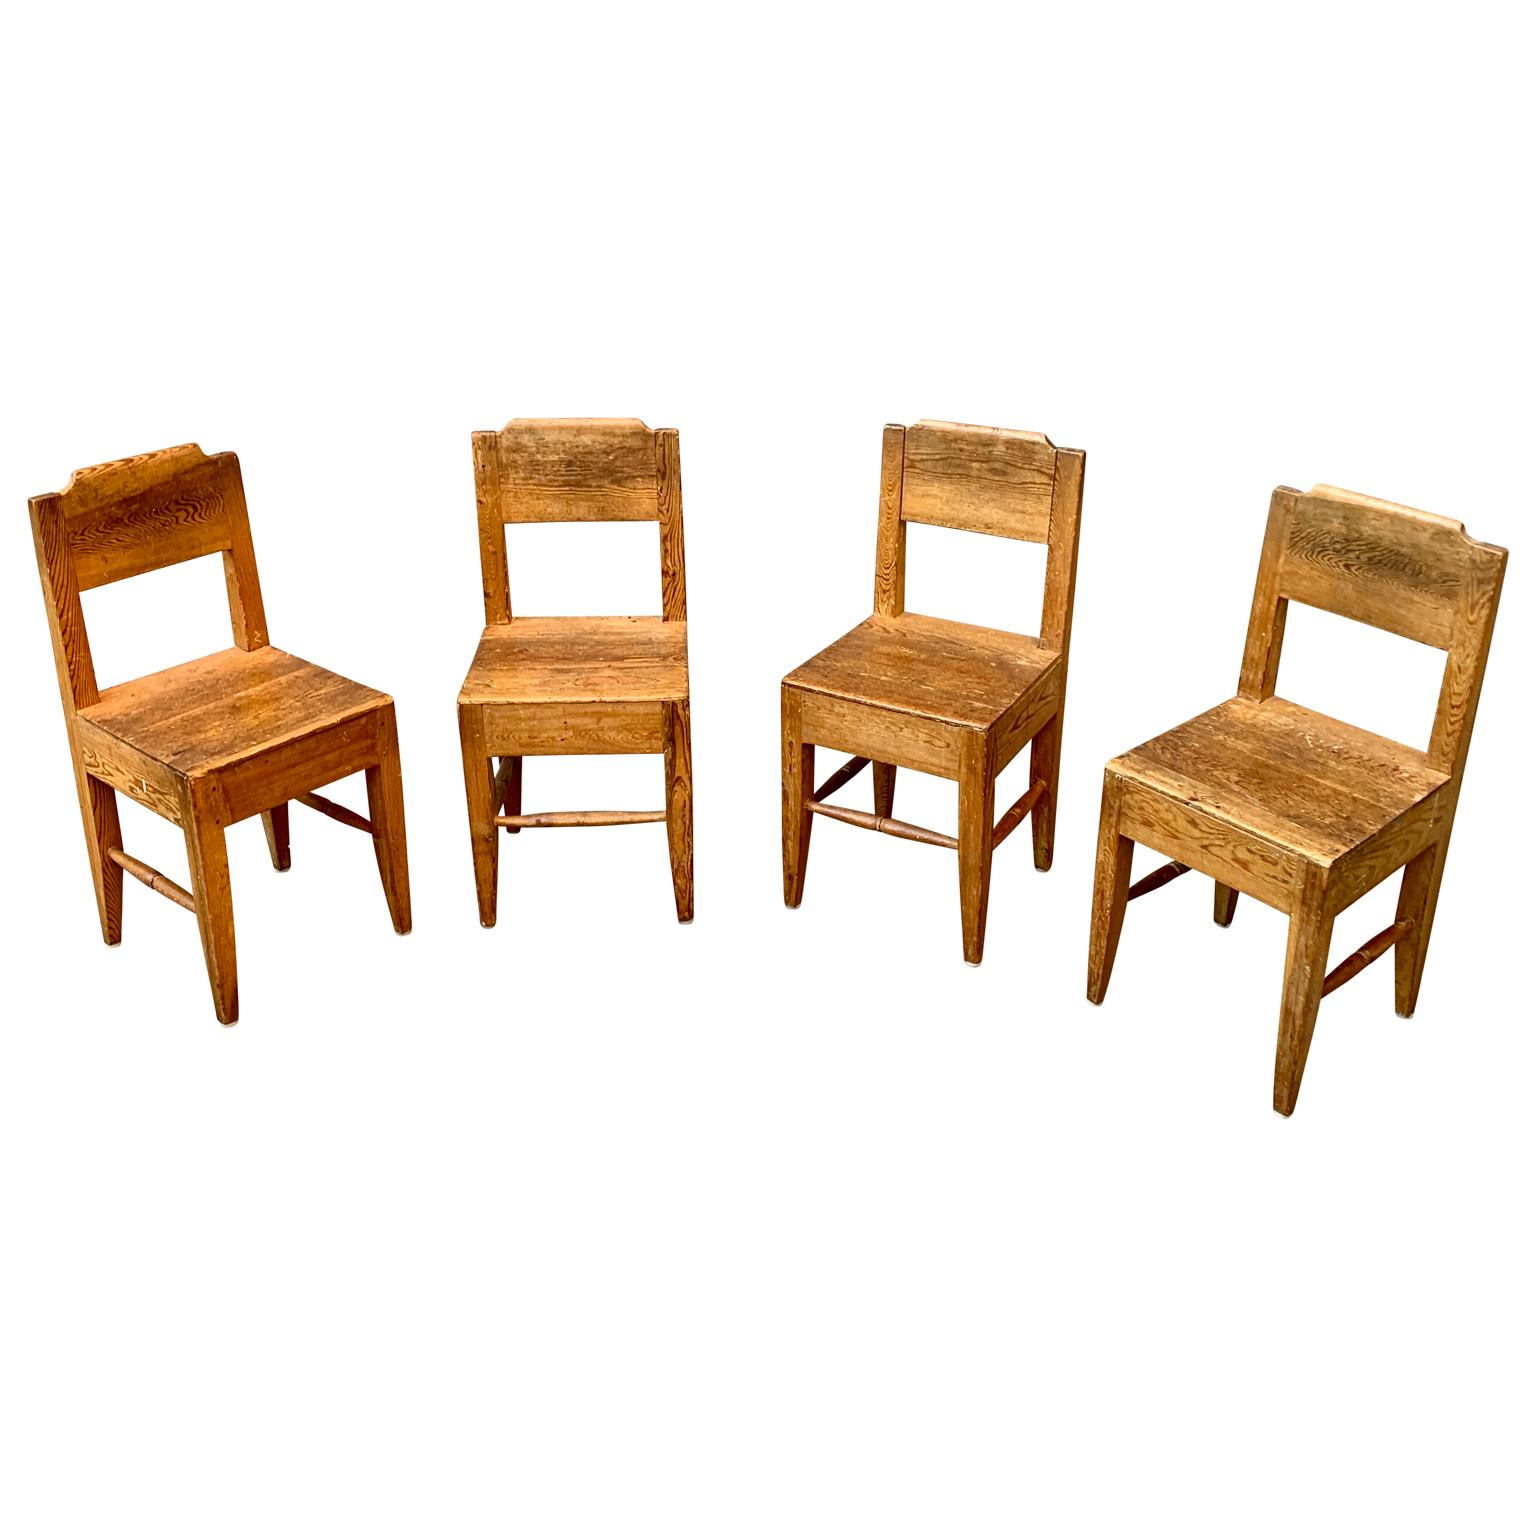 Set of four Swedish 18th Century Folk Art chairs

Set of 4 smaller chairs with amazing vintage patina in pine. 